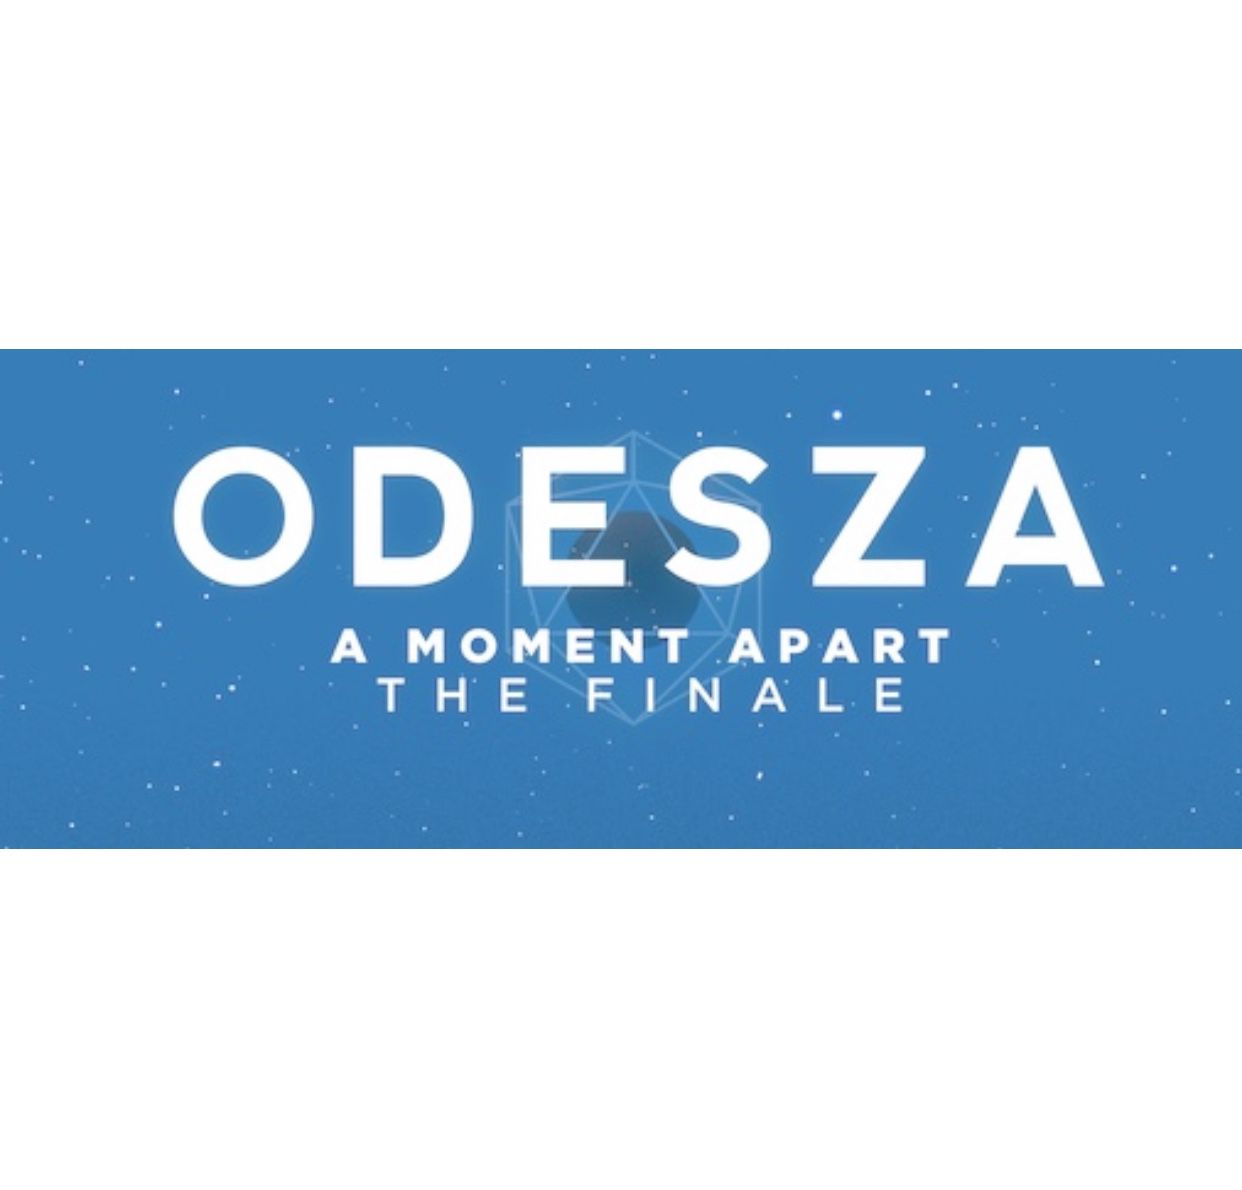 2 Tickets to ODESZA: A Moment Apart on Friday July 26